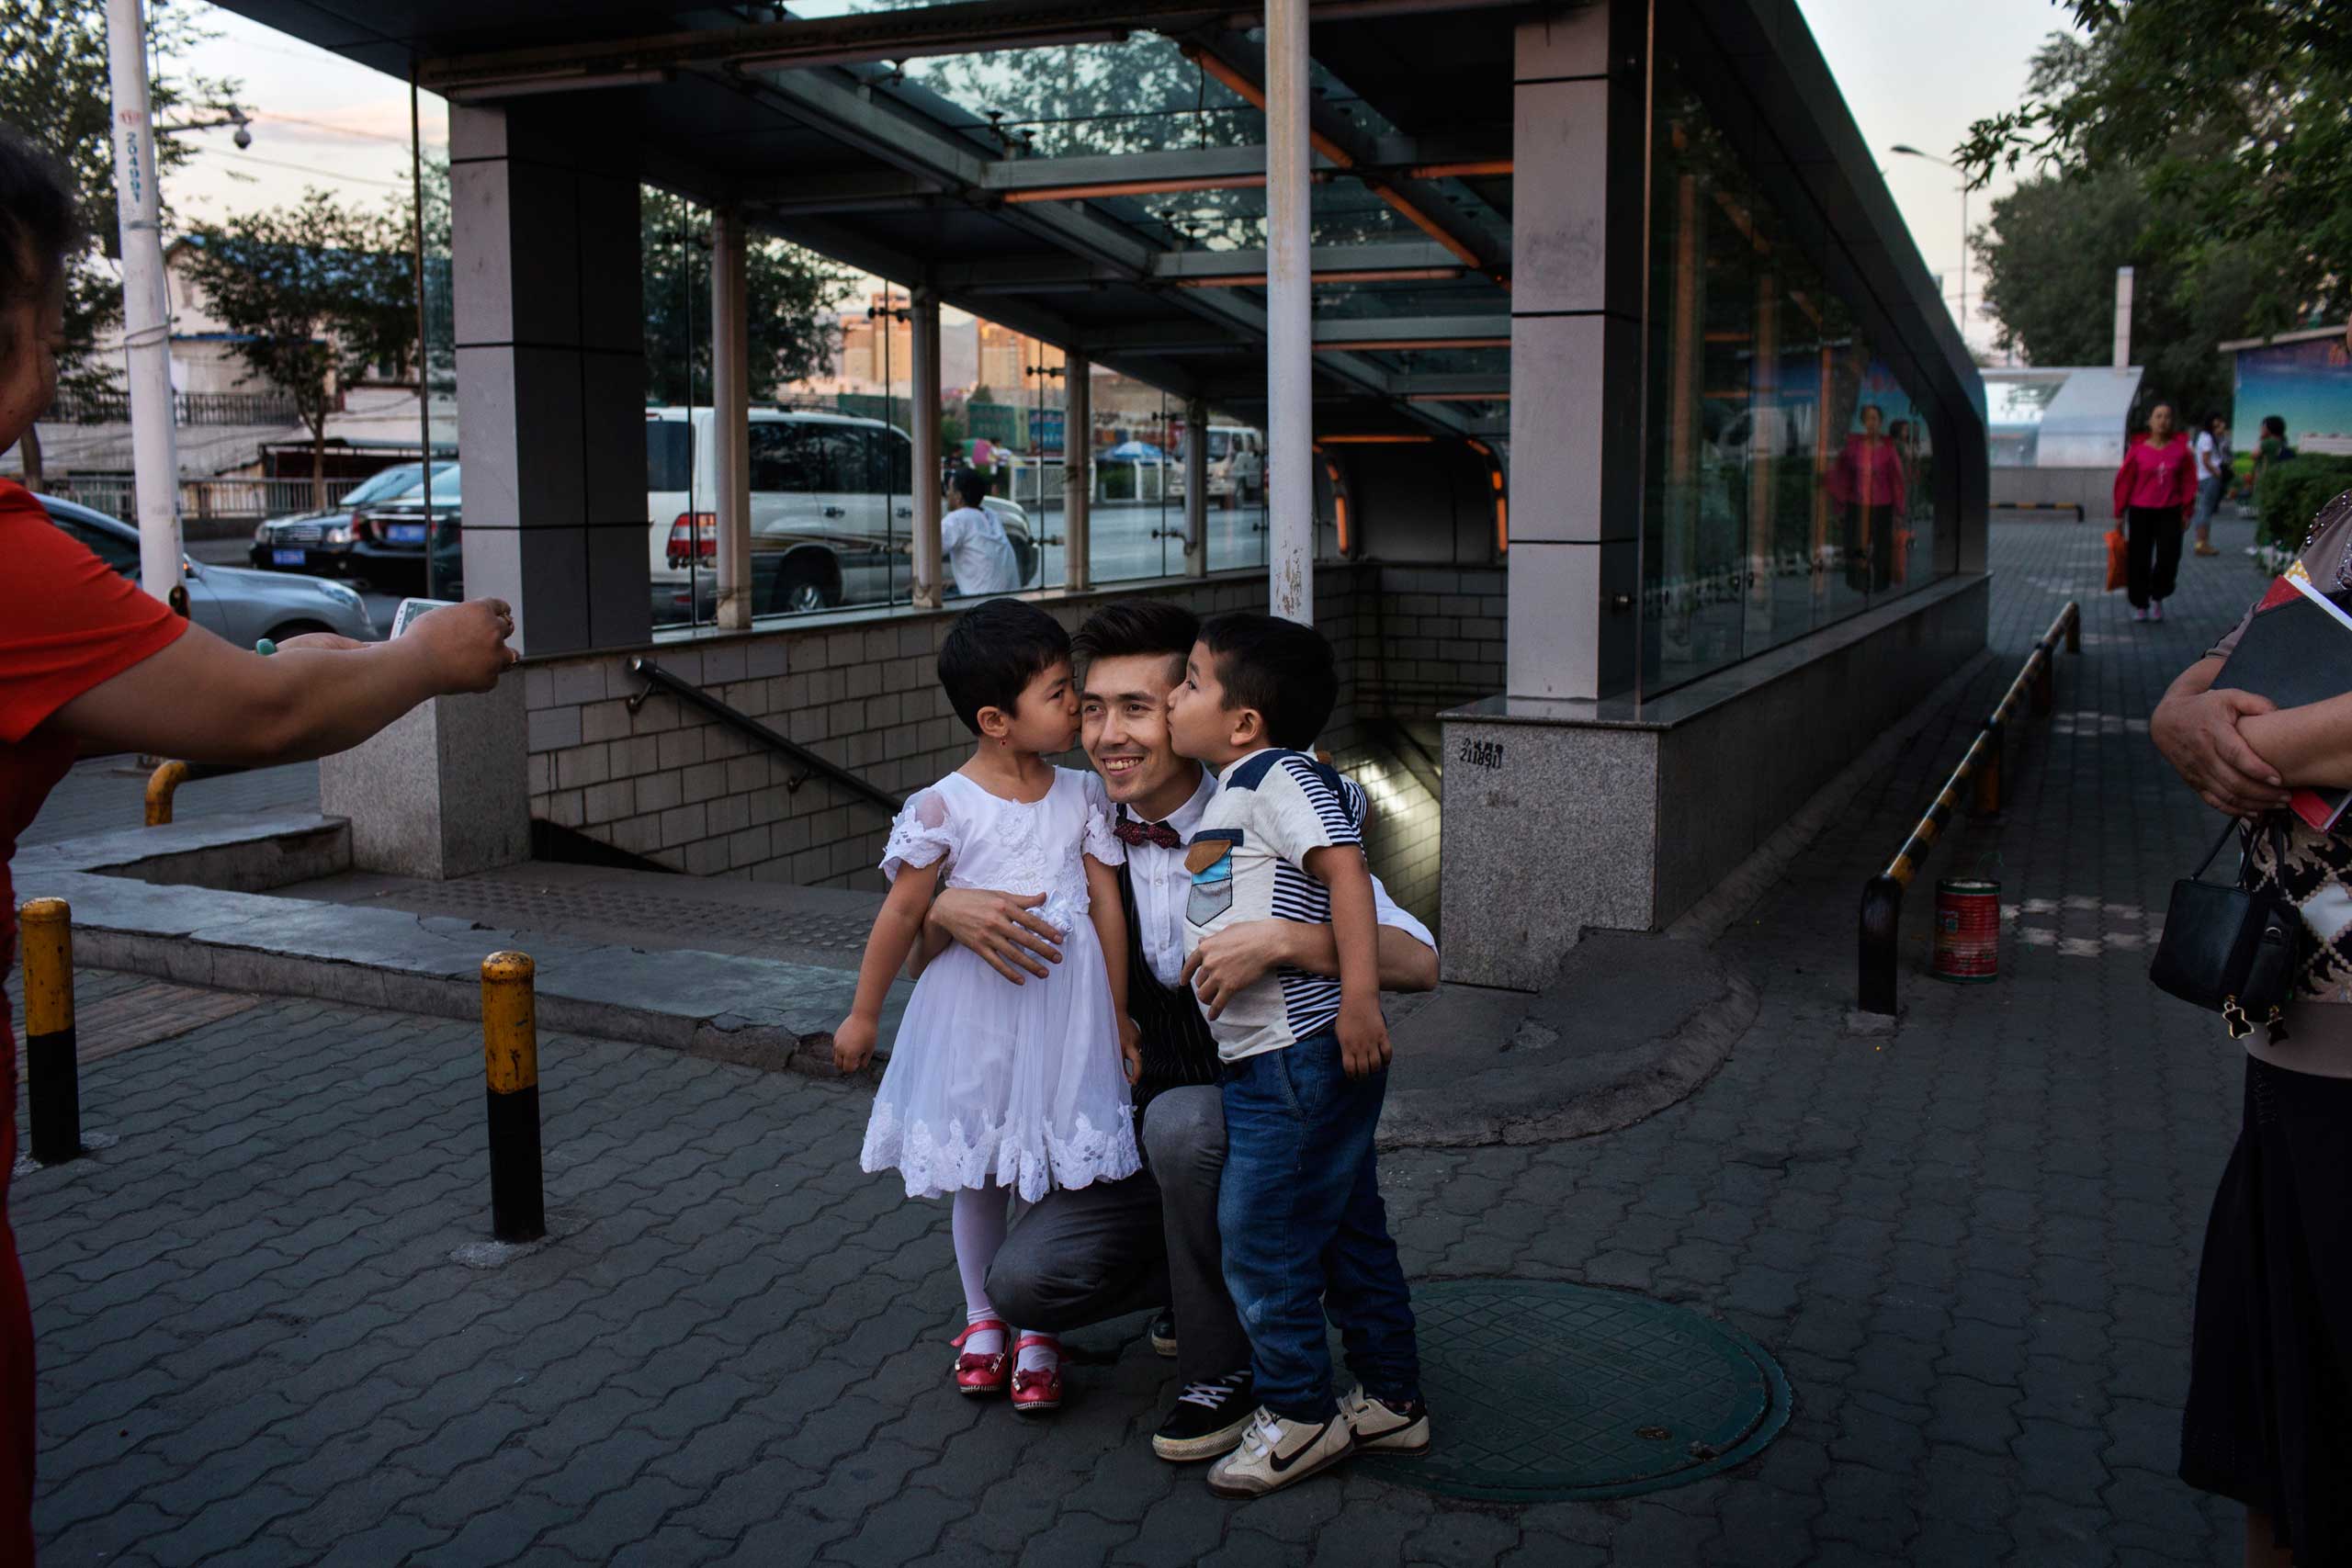 A fan photographs Ablajan with her young relatives after the cancellation of a planned live webcast concert scheduled for that afternoon in Urumqi, China on July 31, 2014.